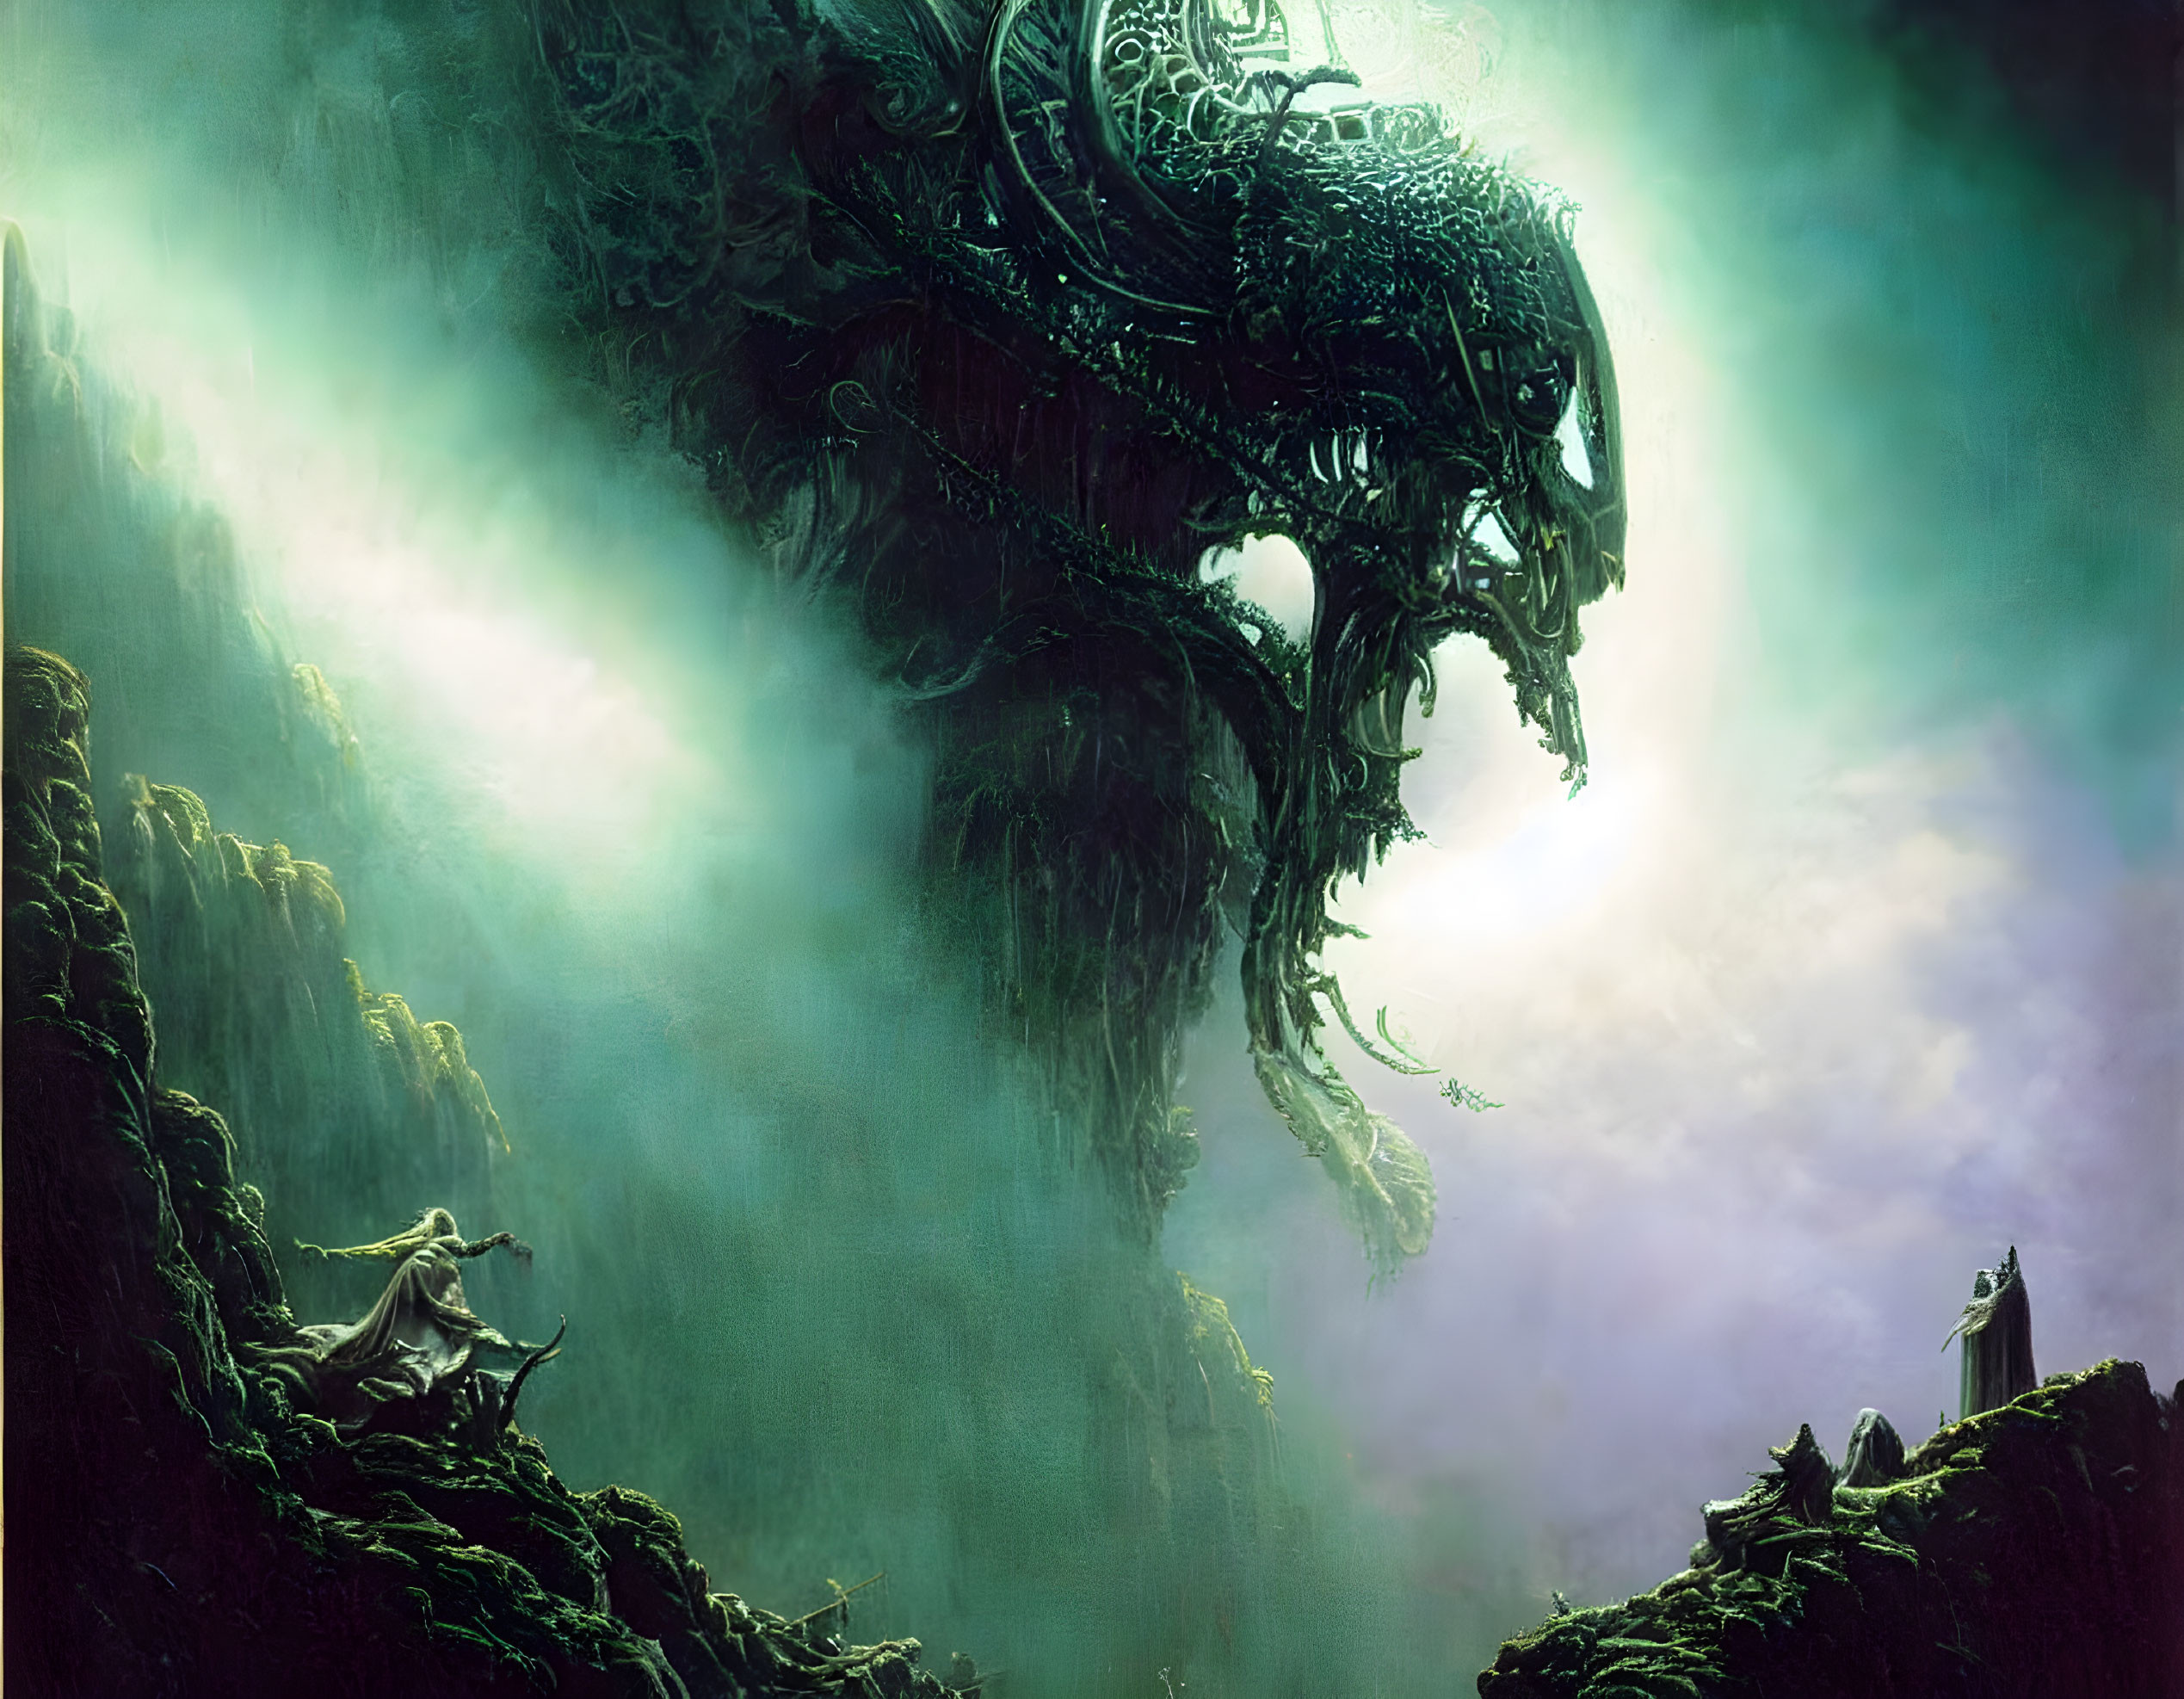 Green-hued image of massive dragon above cliff with figure below, evoking adventure.